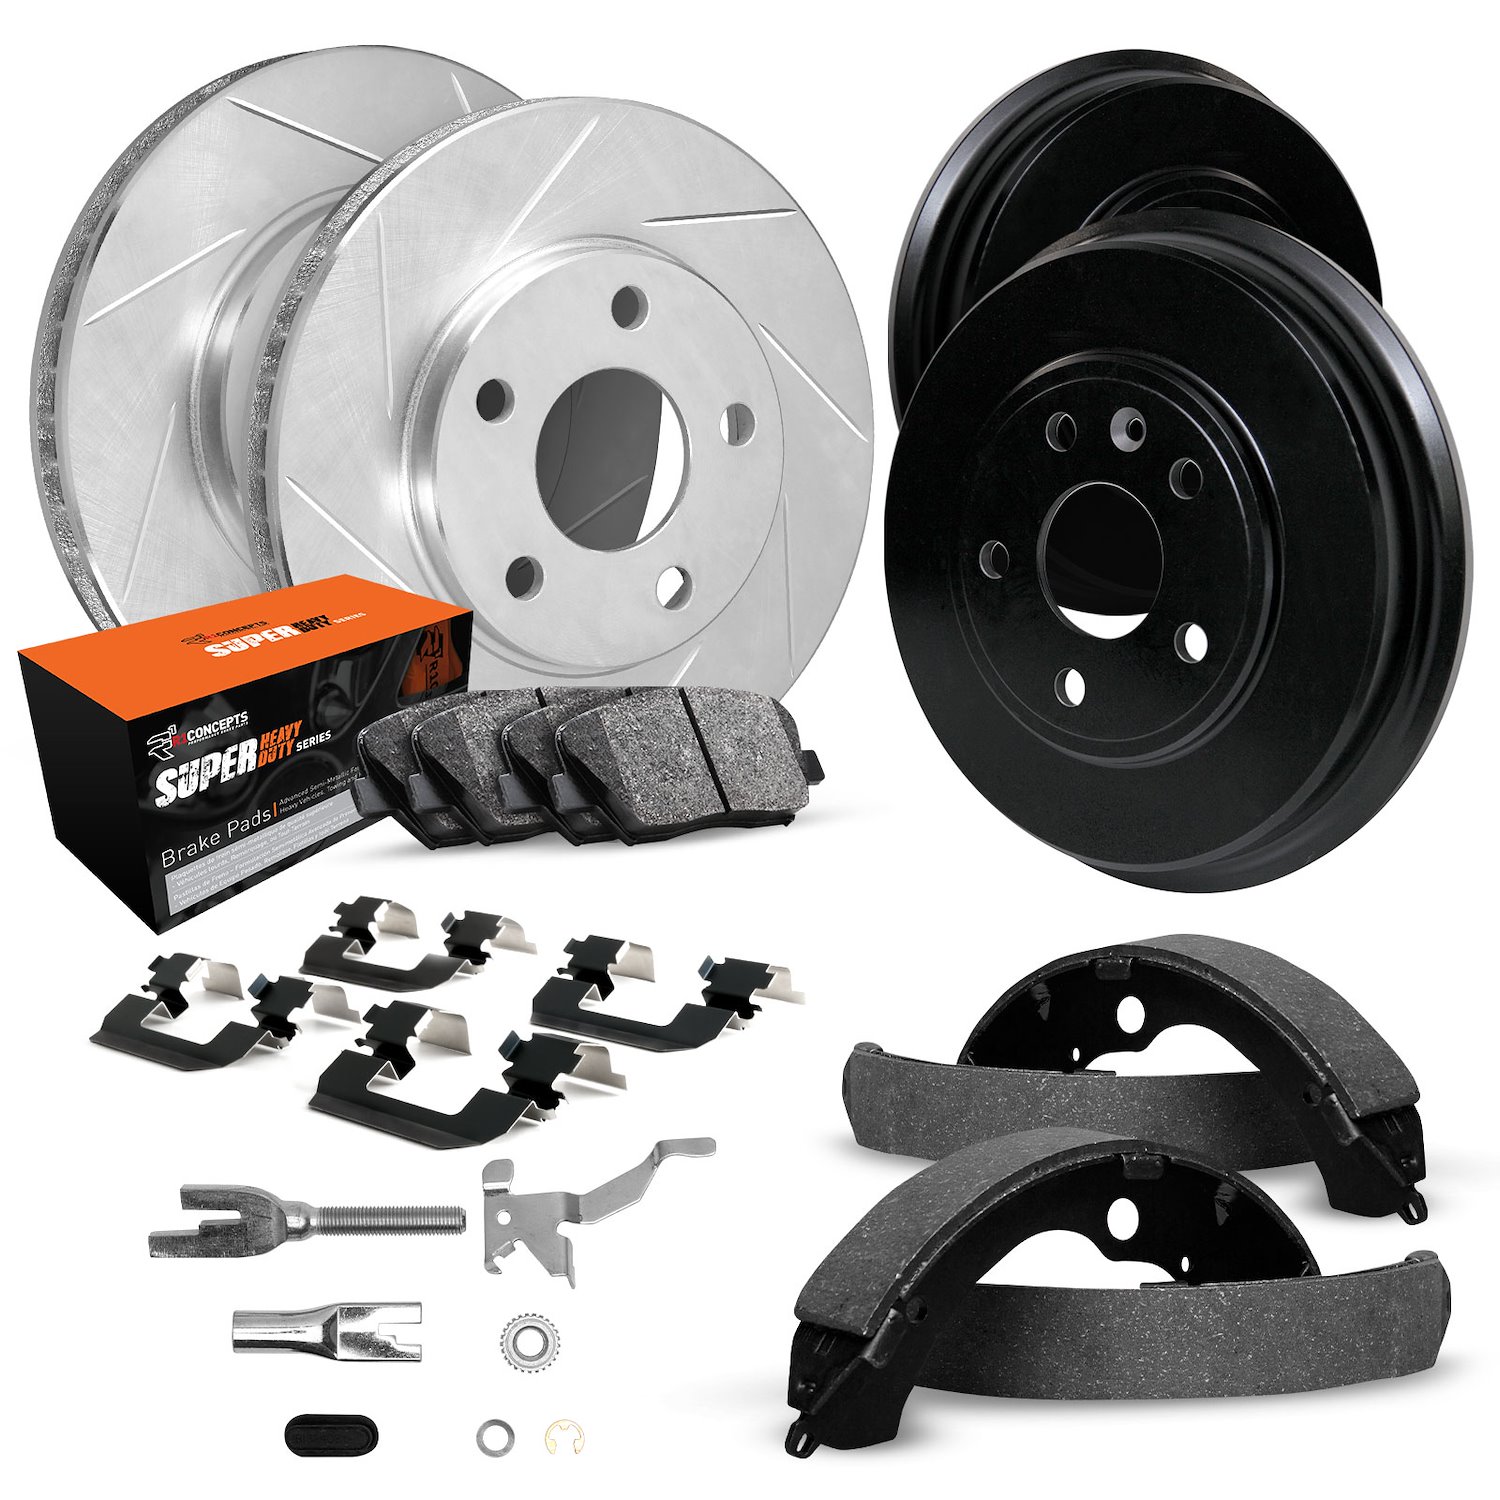 E-Line Slotted Silver Rotor & Drum Set w/Super-Duty Pads, Shoes/Hardware/Adjusters, 2002-2007 GM